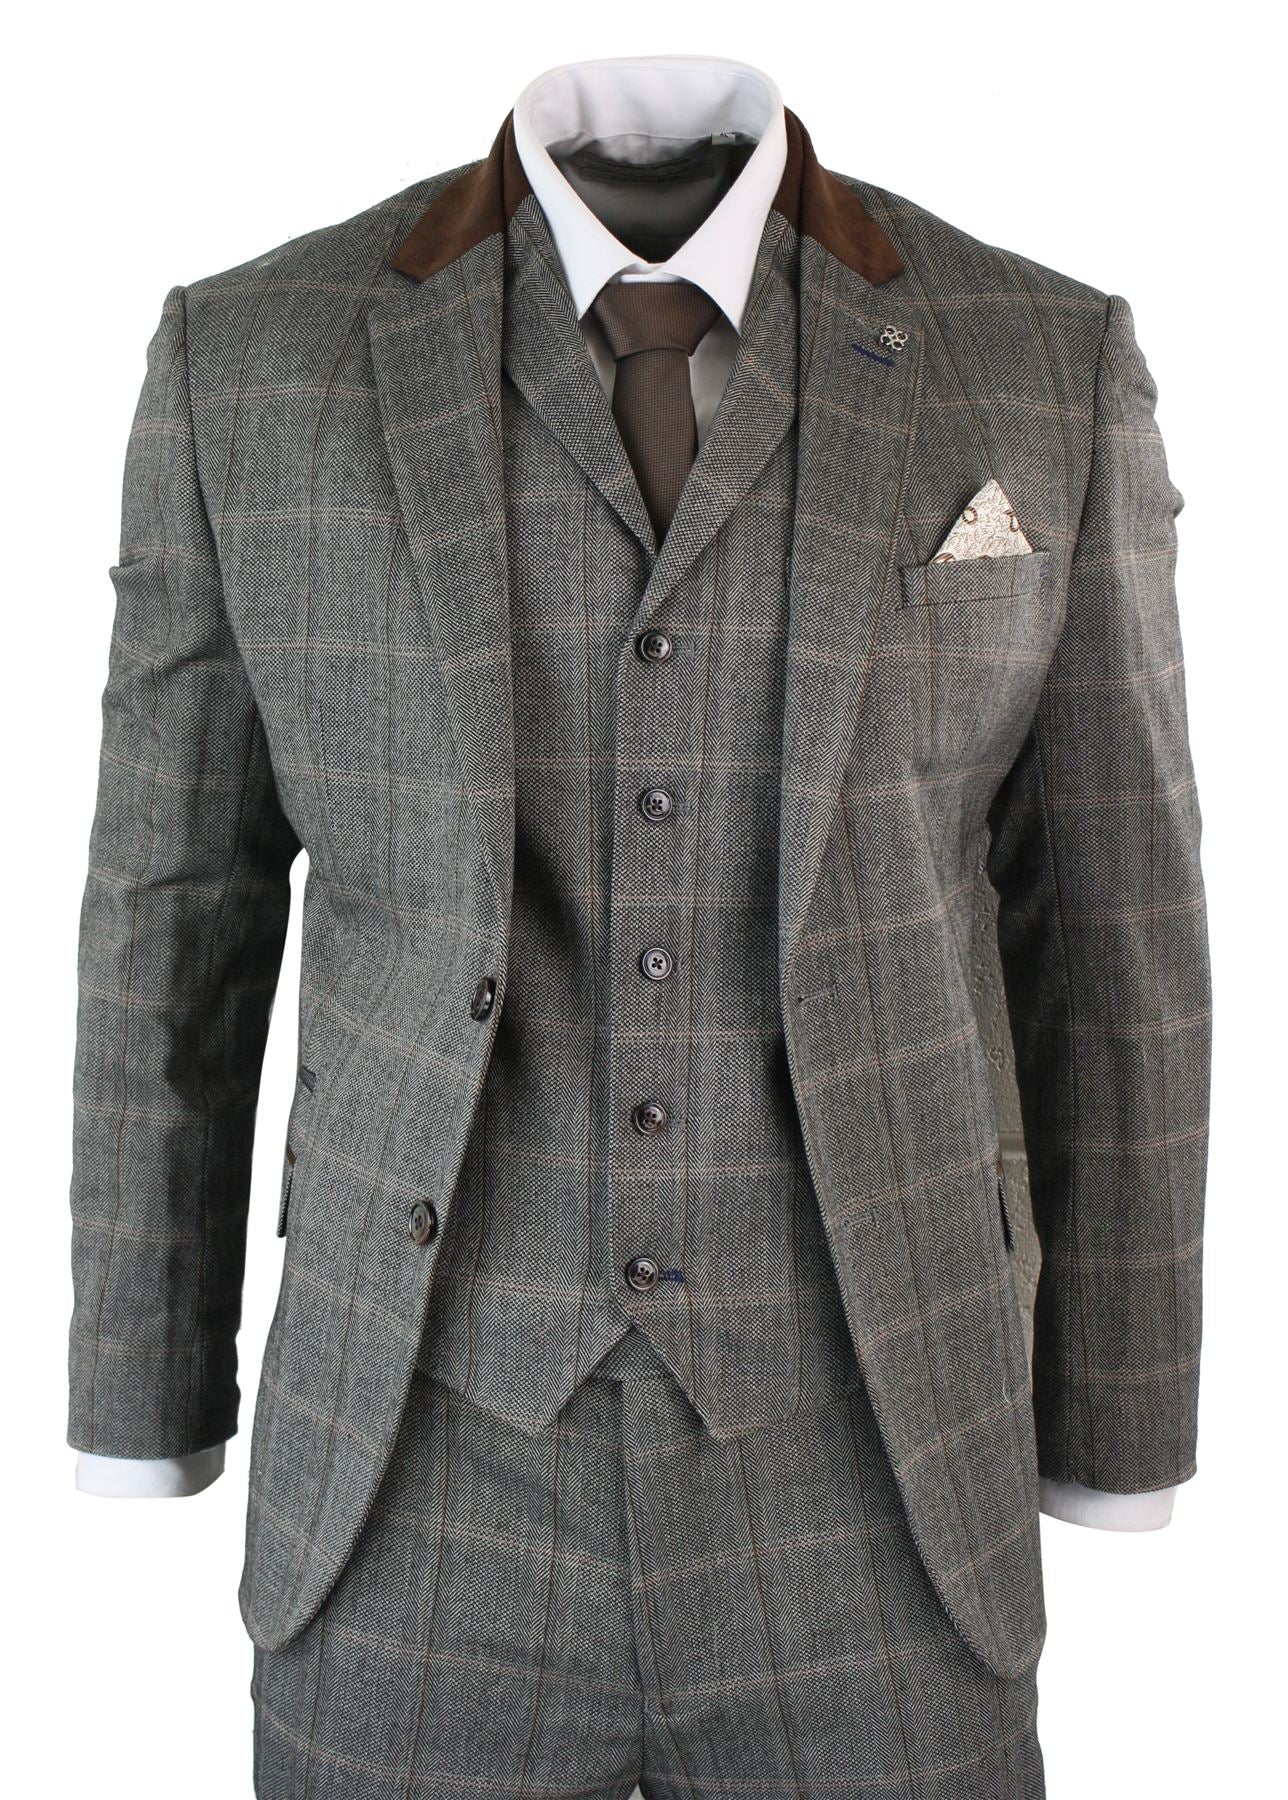 Mens Check Tweed 3 Piece Blue Navy Suit Vintage Retro Tailored Fit ...